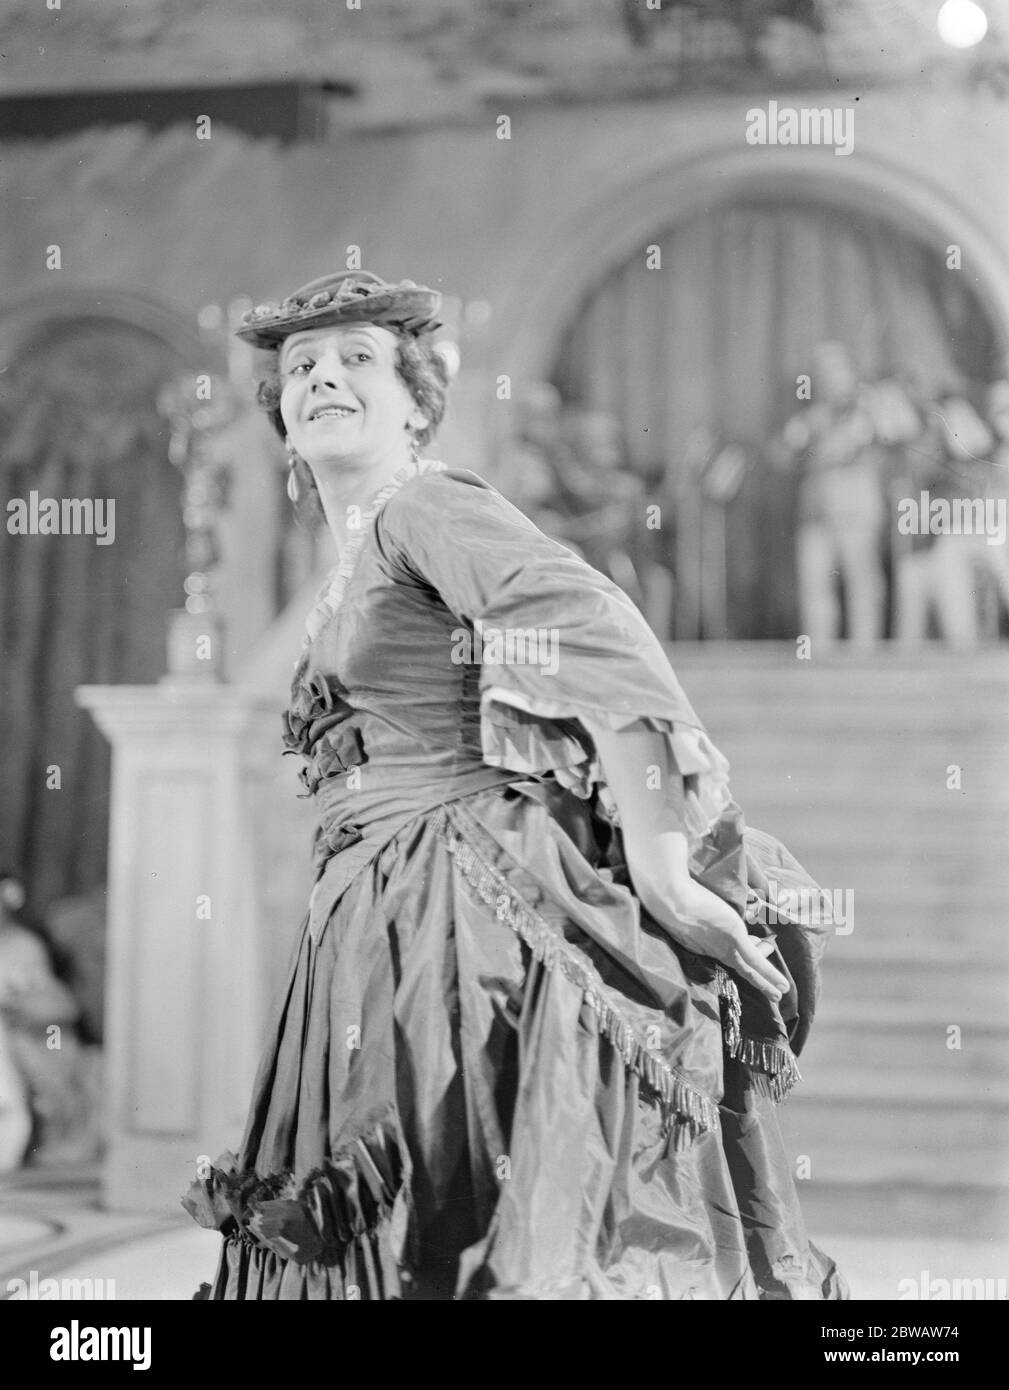 Her Newest Role Tamara Platonovna Karsavina ( 10 March 1885 - 26 May 1978 ) Karsavina as a parisenne dancer Karsavina , is to appear in the film ' The Old Wives' Tale ' she appears in the dancing scene in a Paris cafe 29 October 1921 Stock Photo